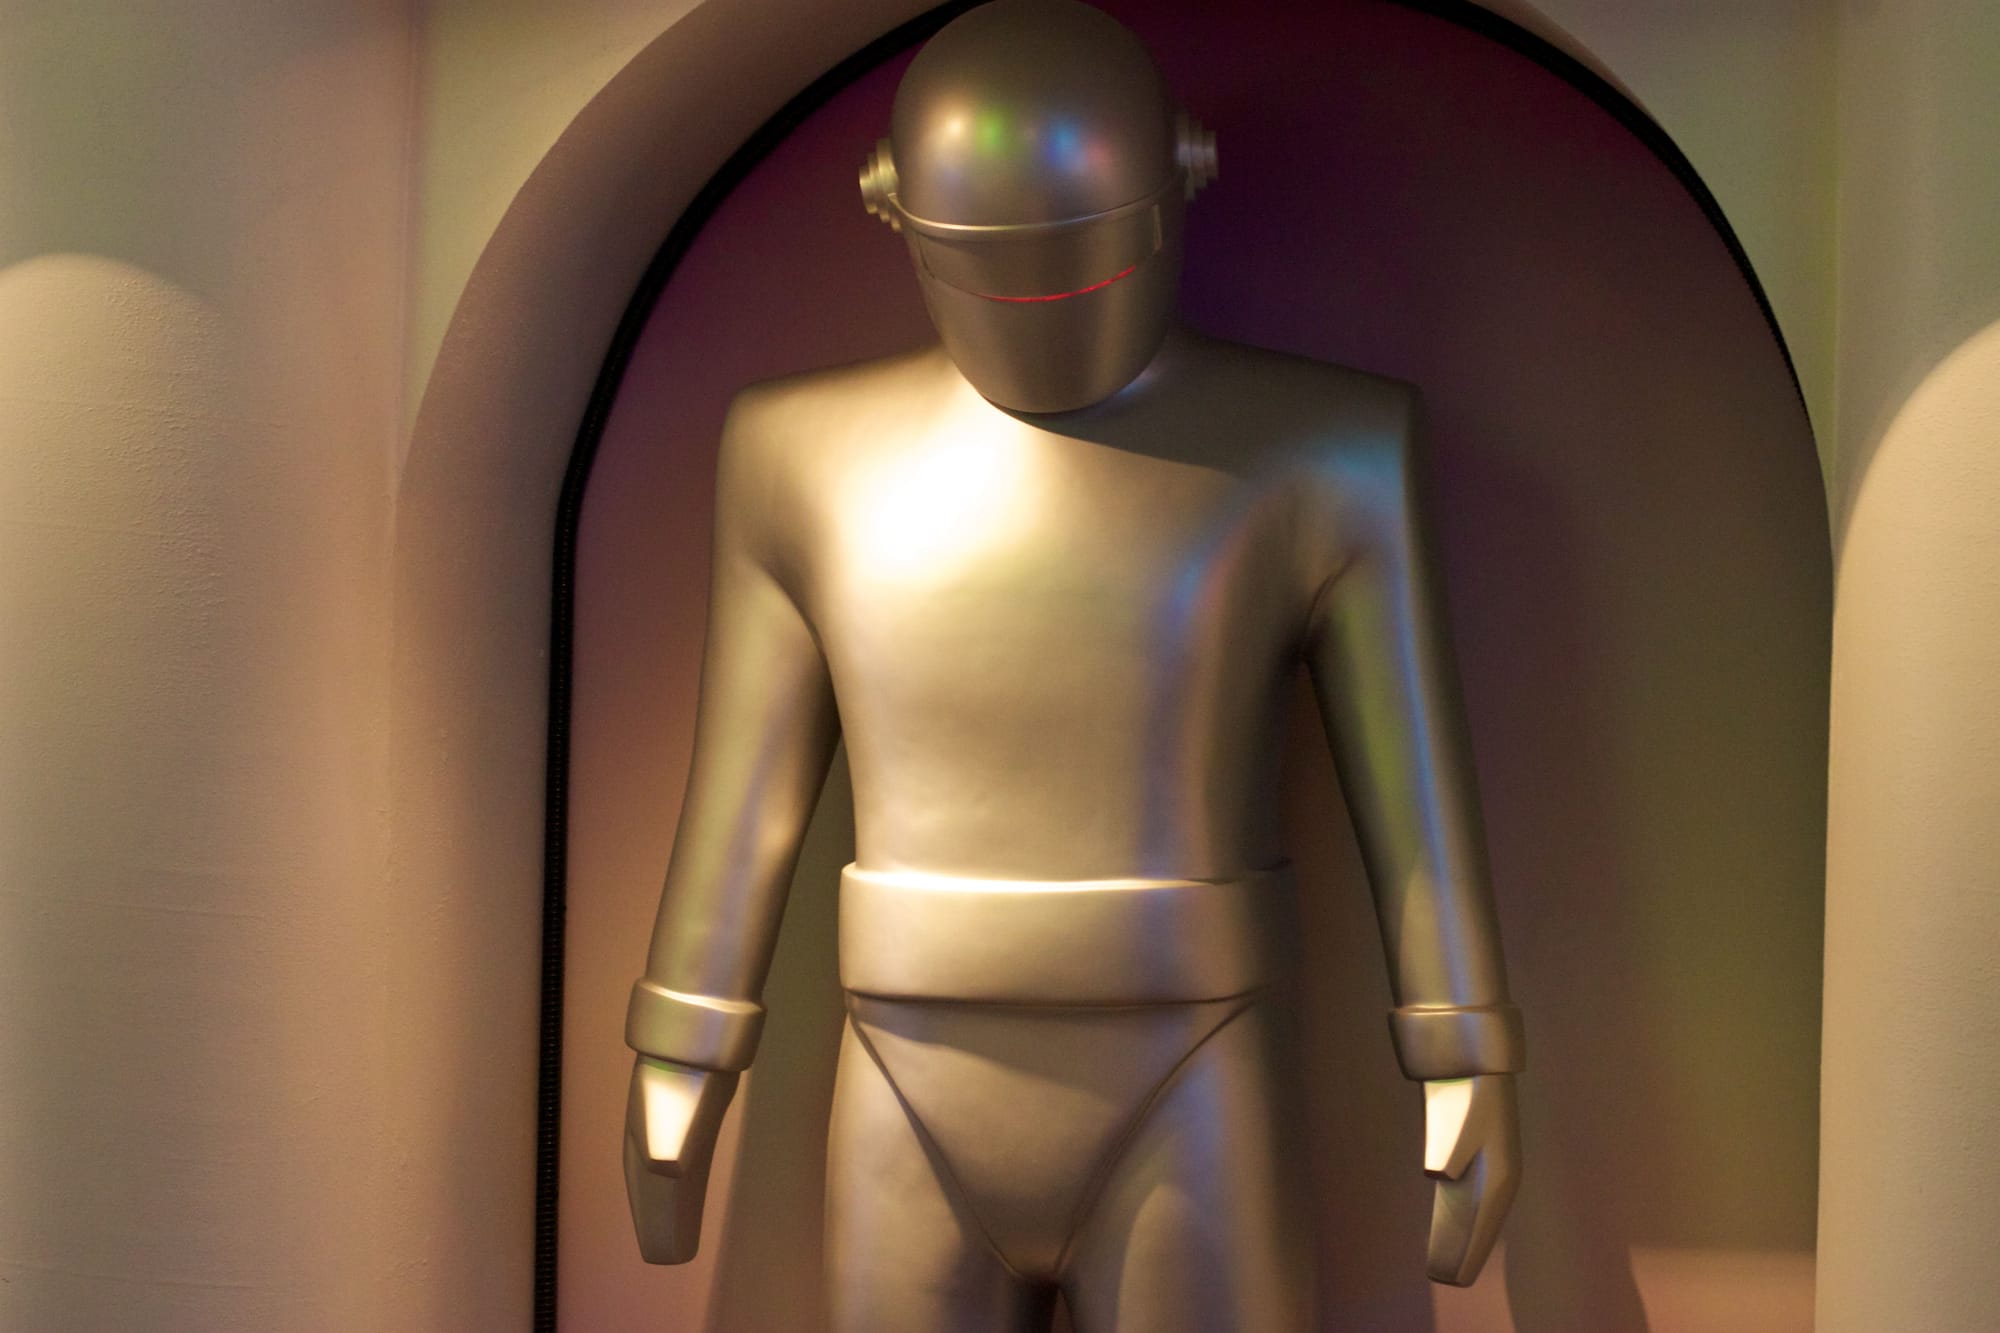 The all-powerful robot Gort, from the 1951 The Day the Earth Stood Still.